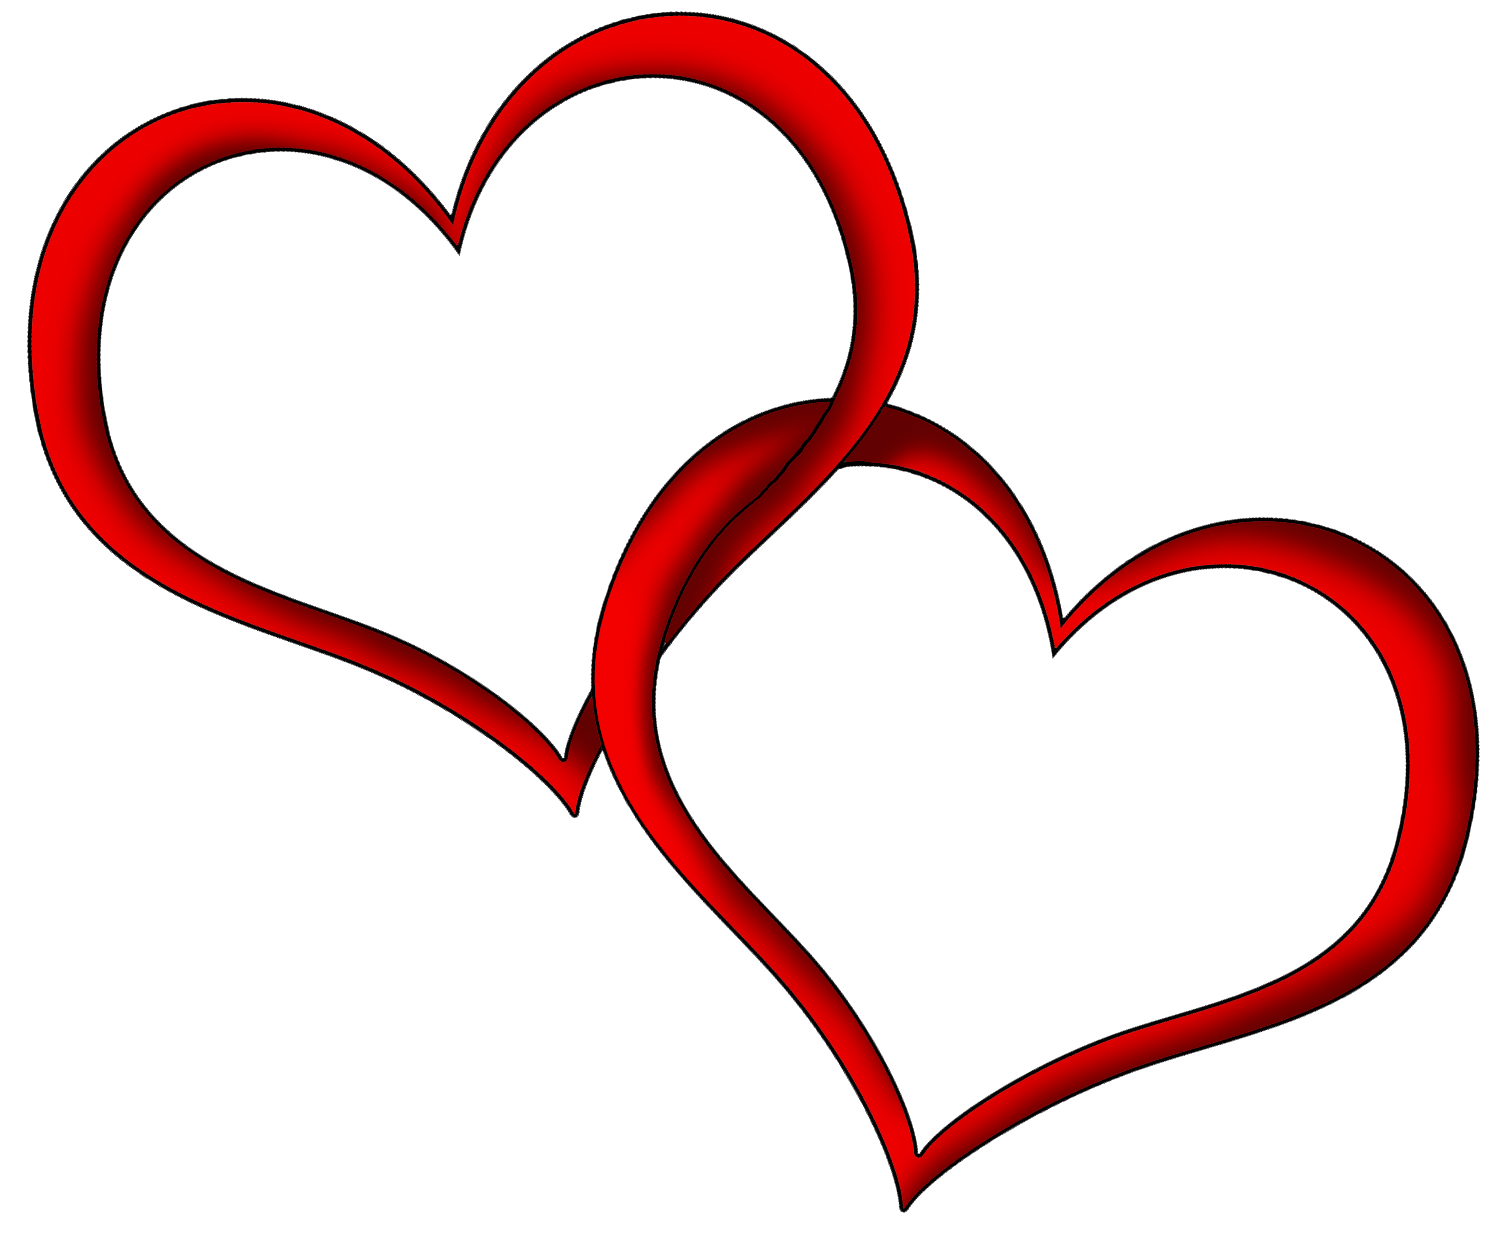  - Heart Clipart Images